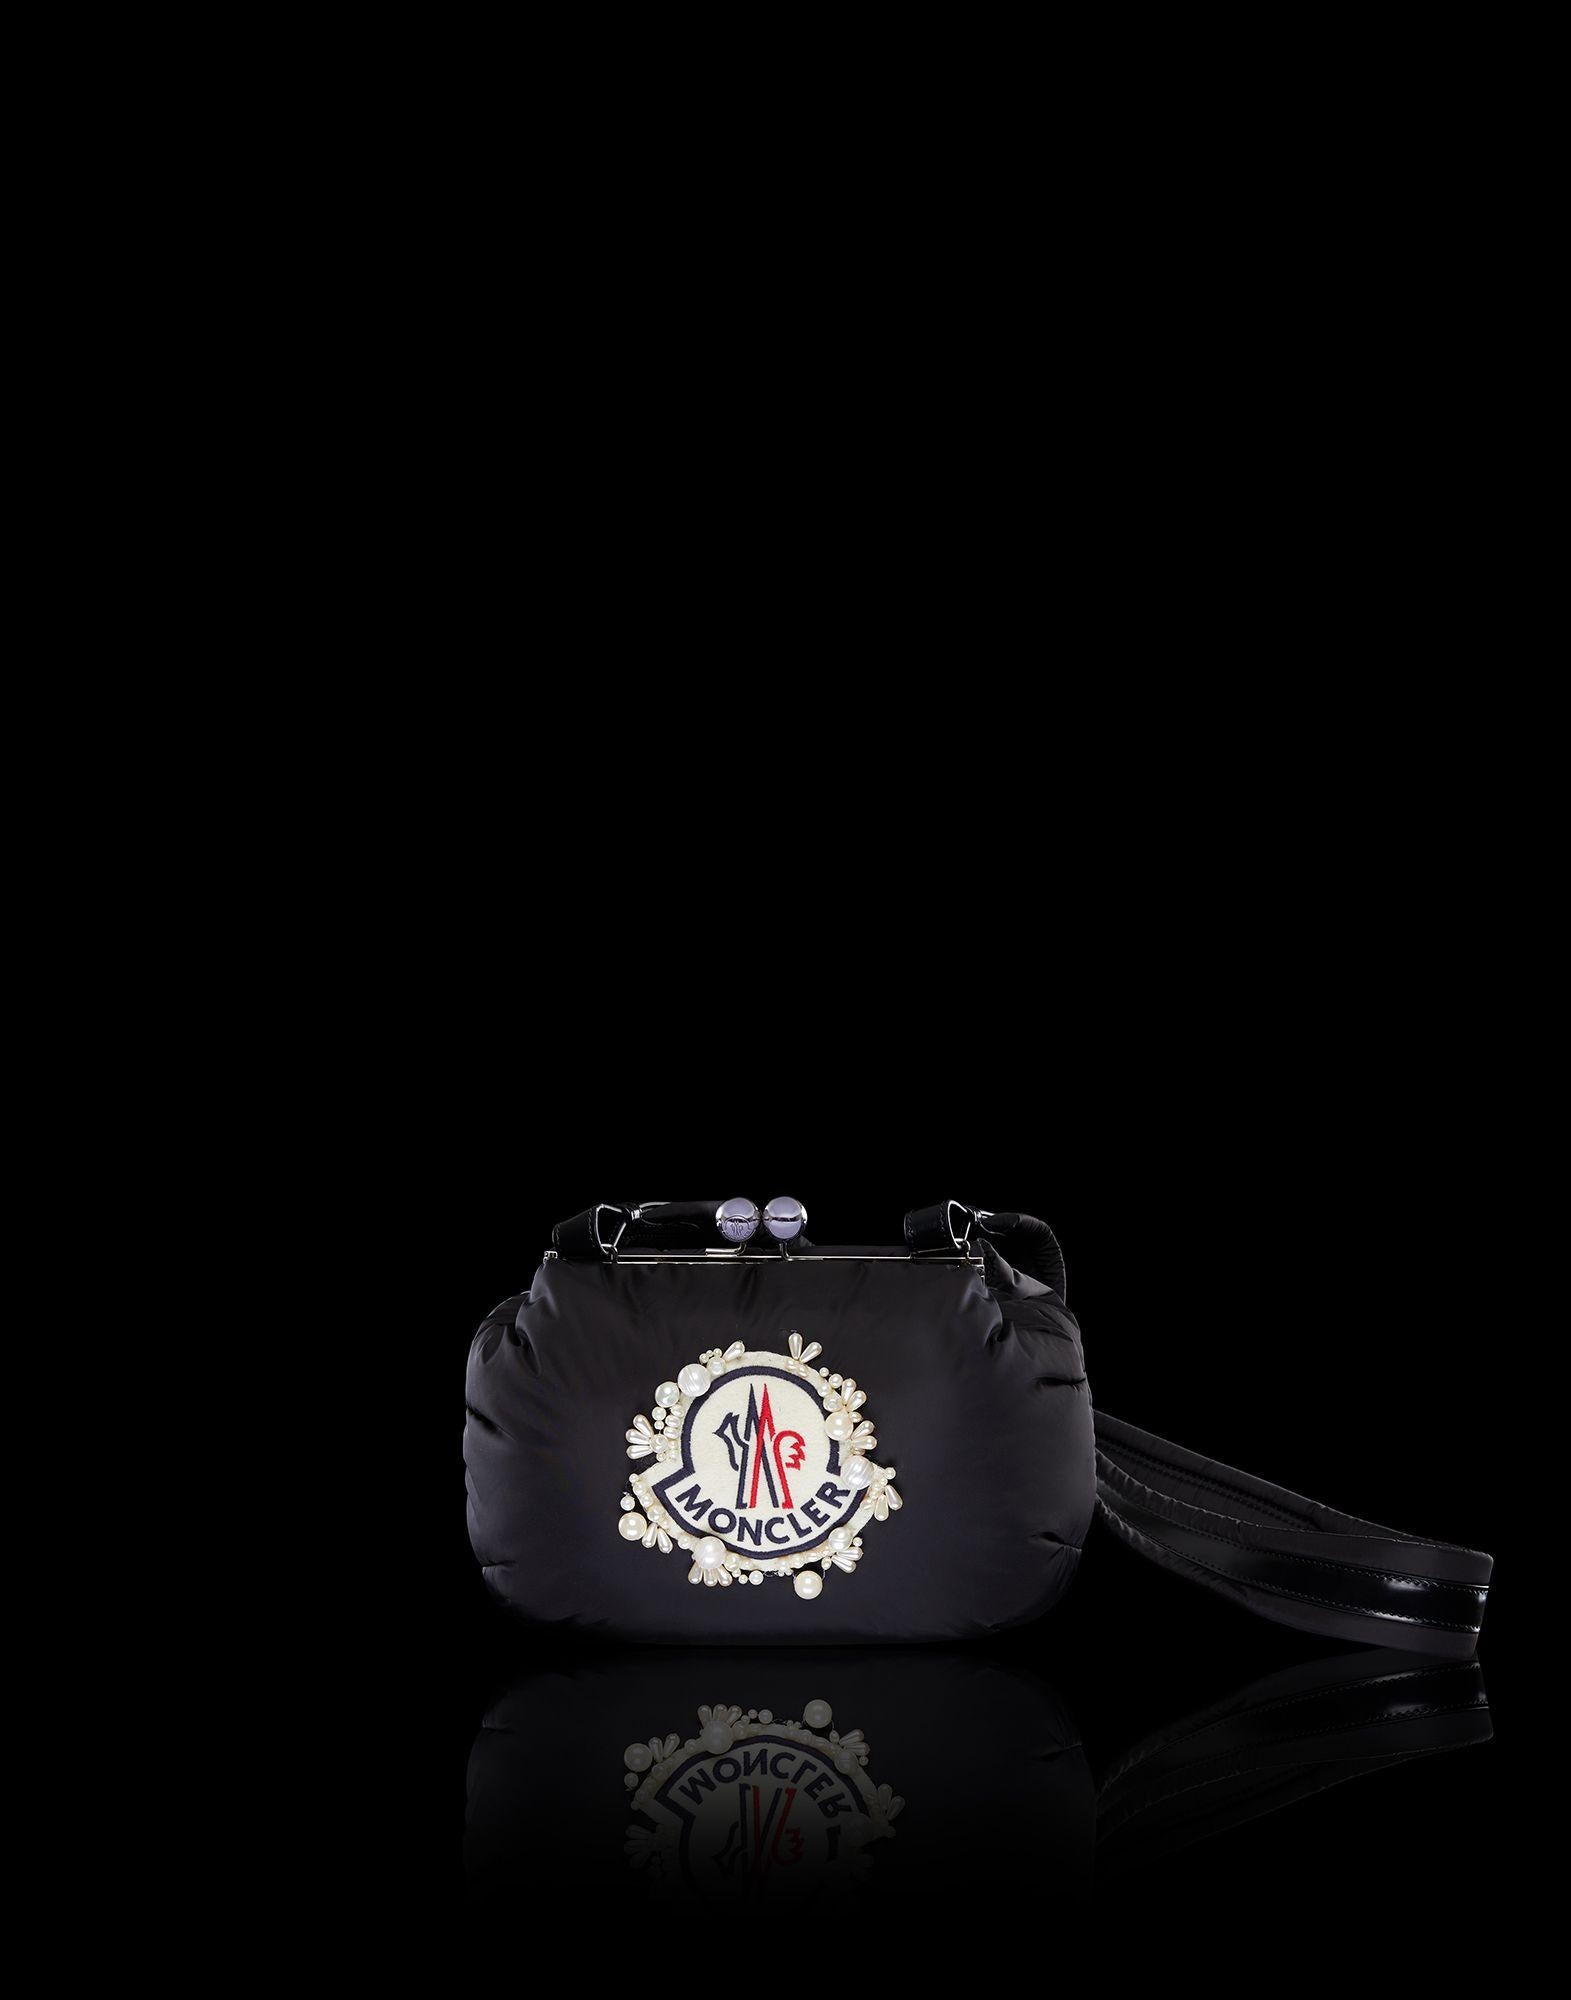 The quintessential soft and lightweight metropolitan accessory to dress down or wear with a sophisticated look For Moncler Simone Rocha, collection nº4 of the Moncler Genius project, the bag is not just a simple accessory, but an element of